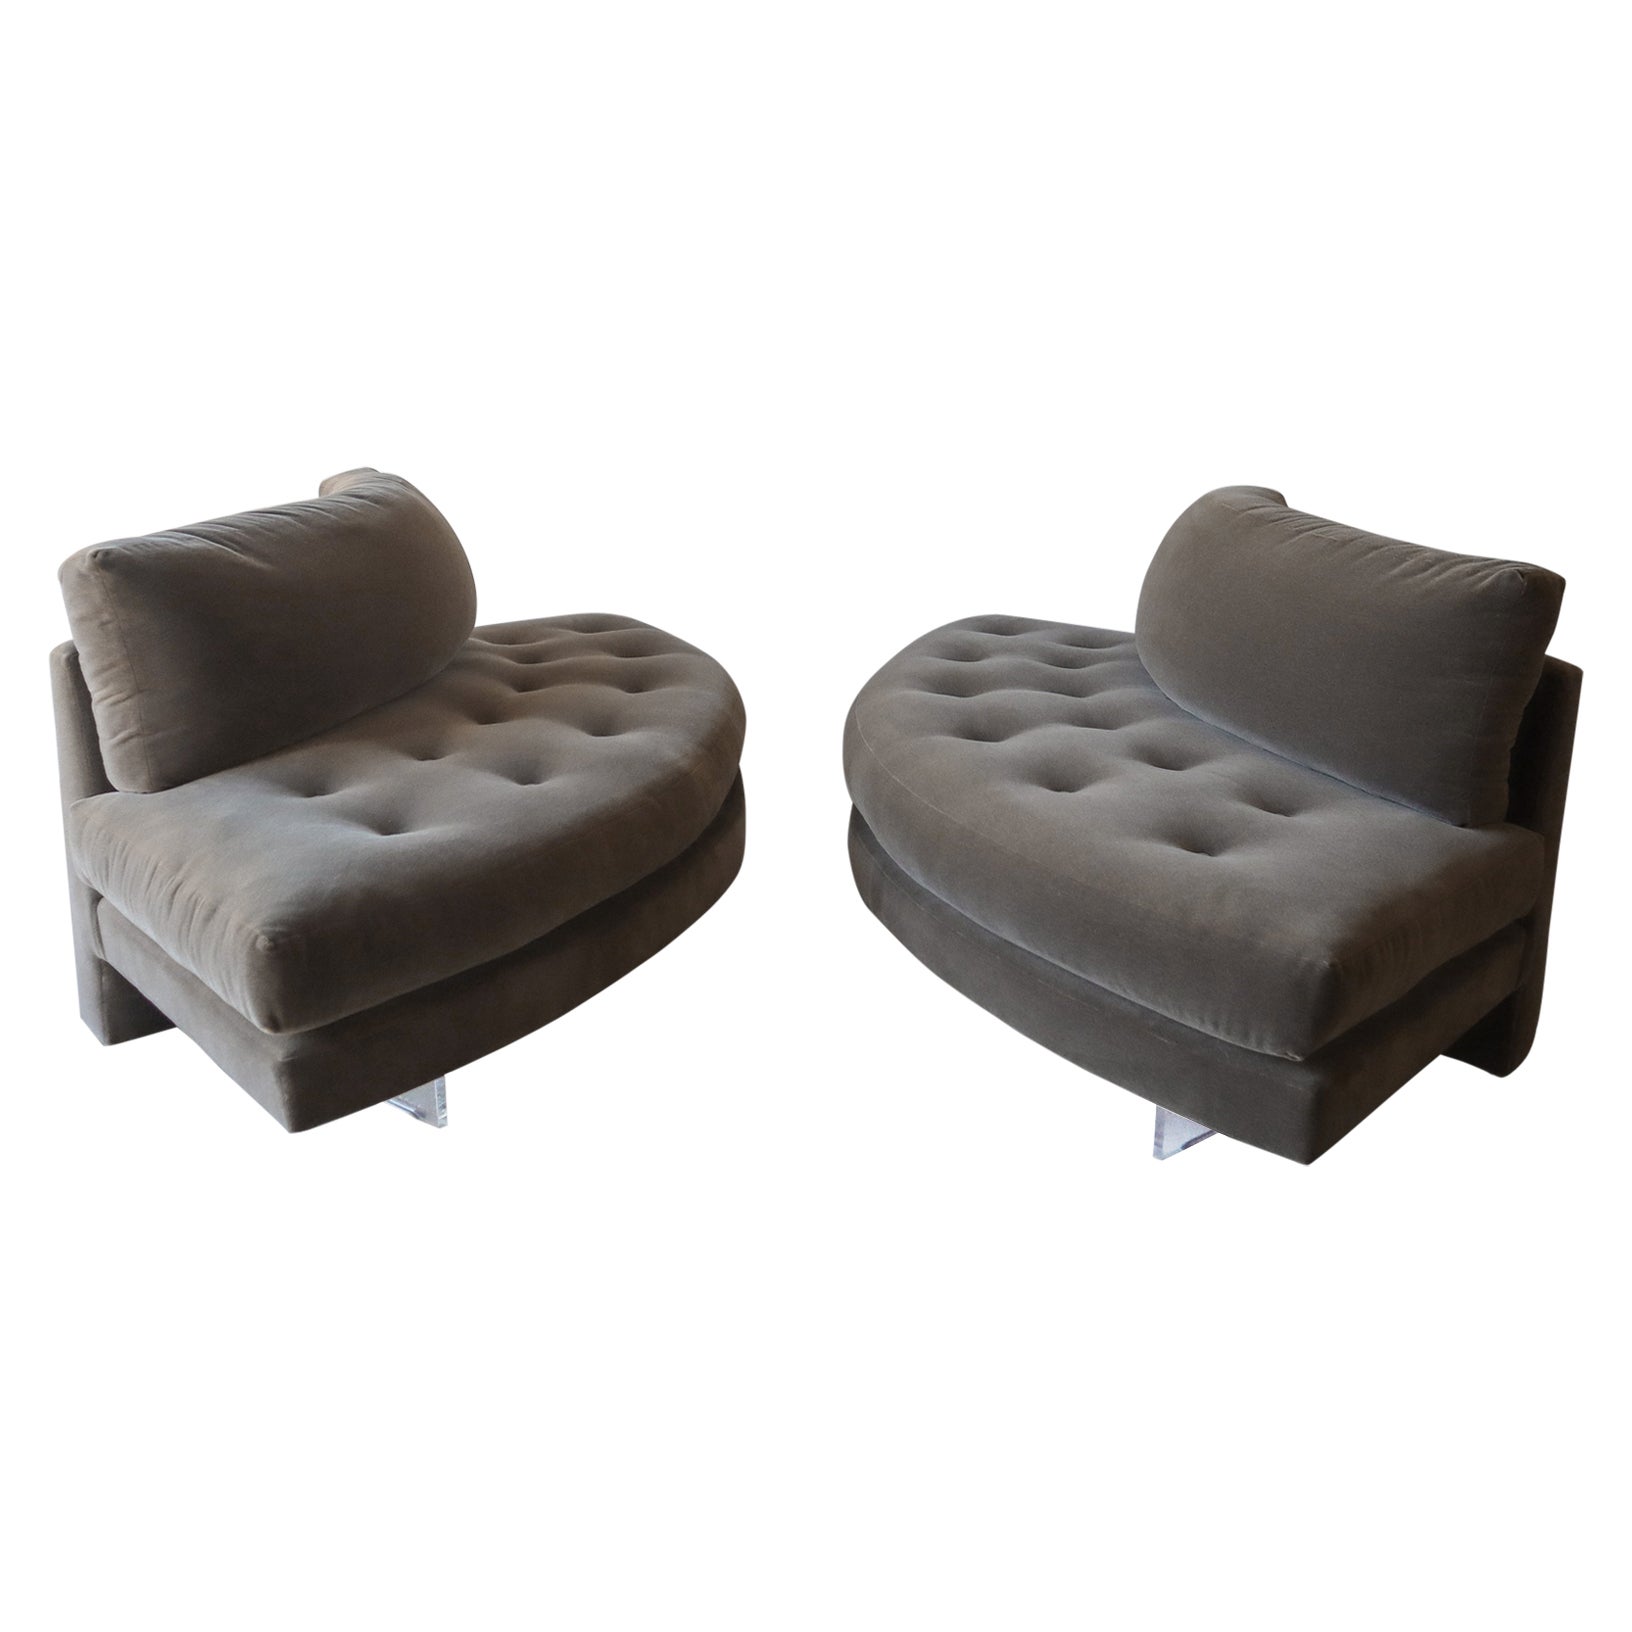 RARE Pair of Curved Omnibus Sofas by Vladimir Kagan For Sale